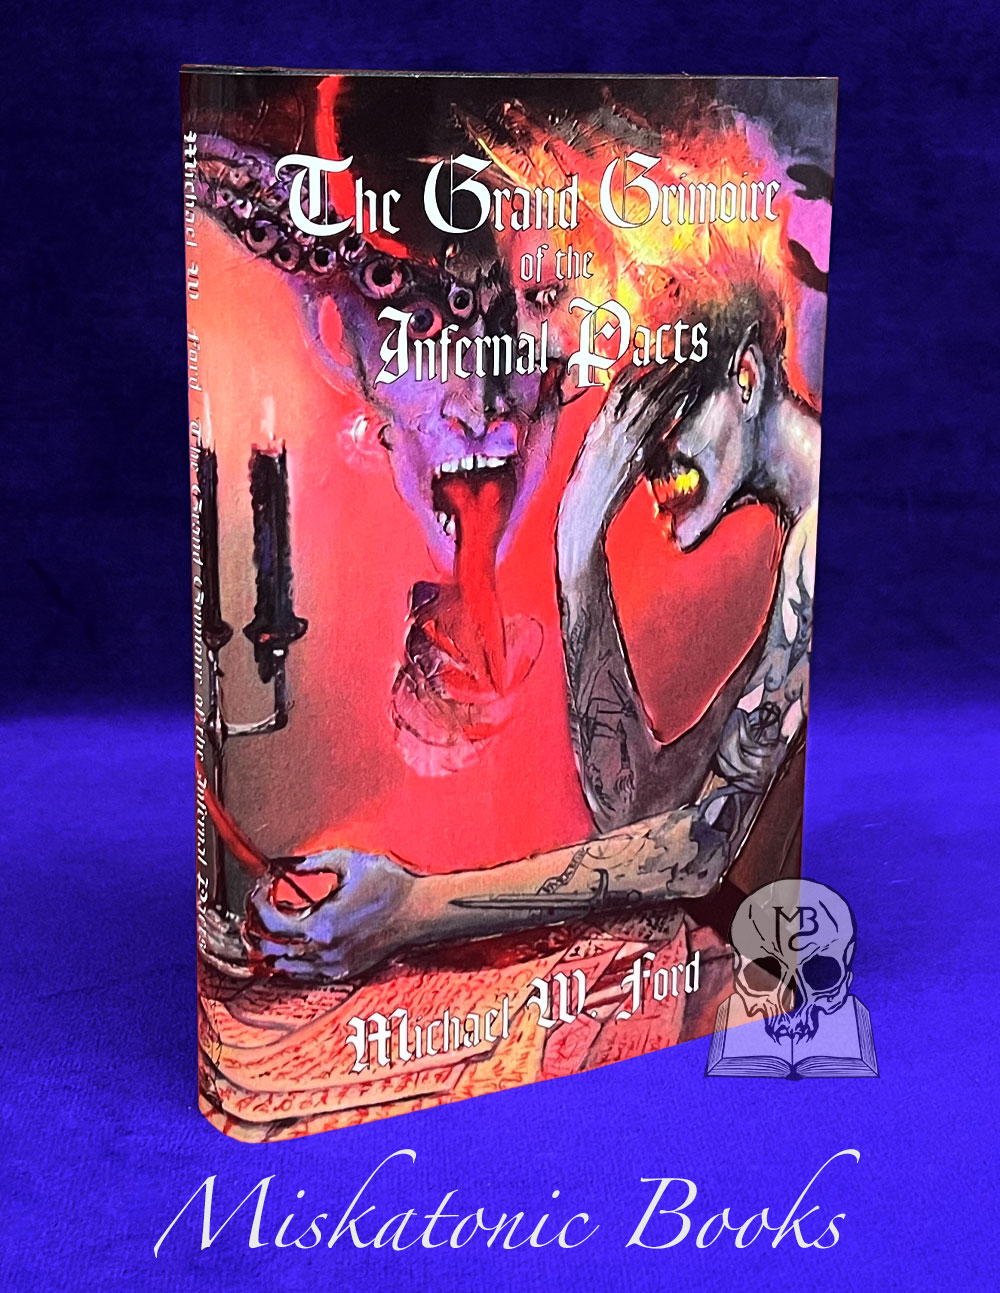 THE GRAND GRIMOIRE OF INFERNAL PACTS by Michael W. Ford - Limited Edition Hardcover